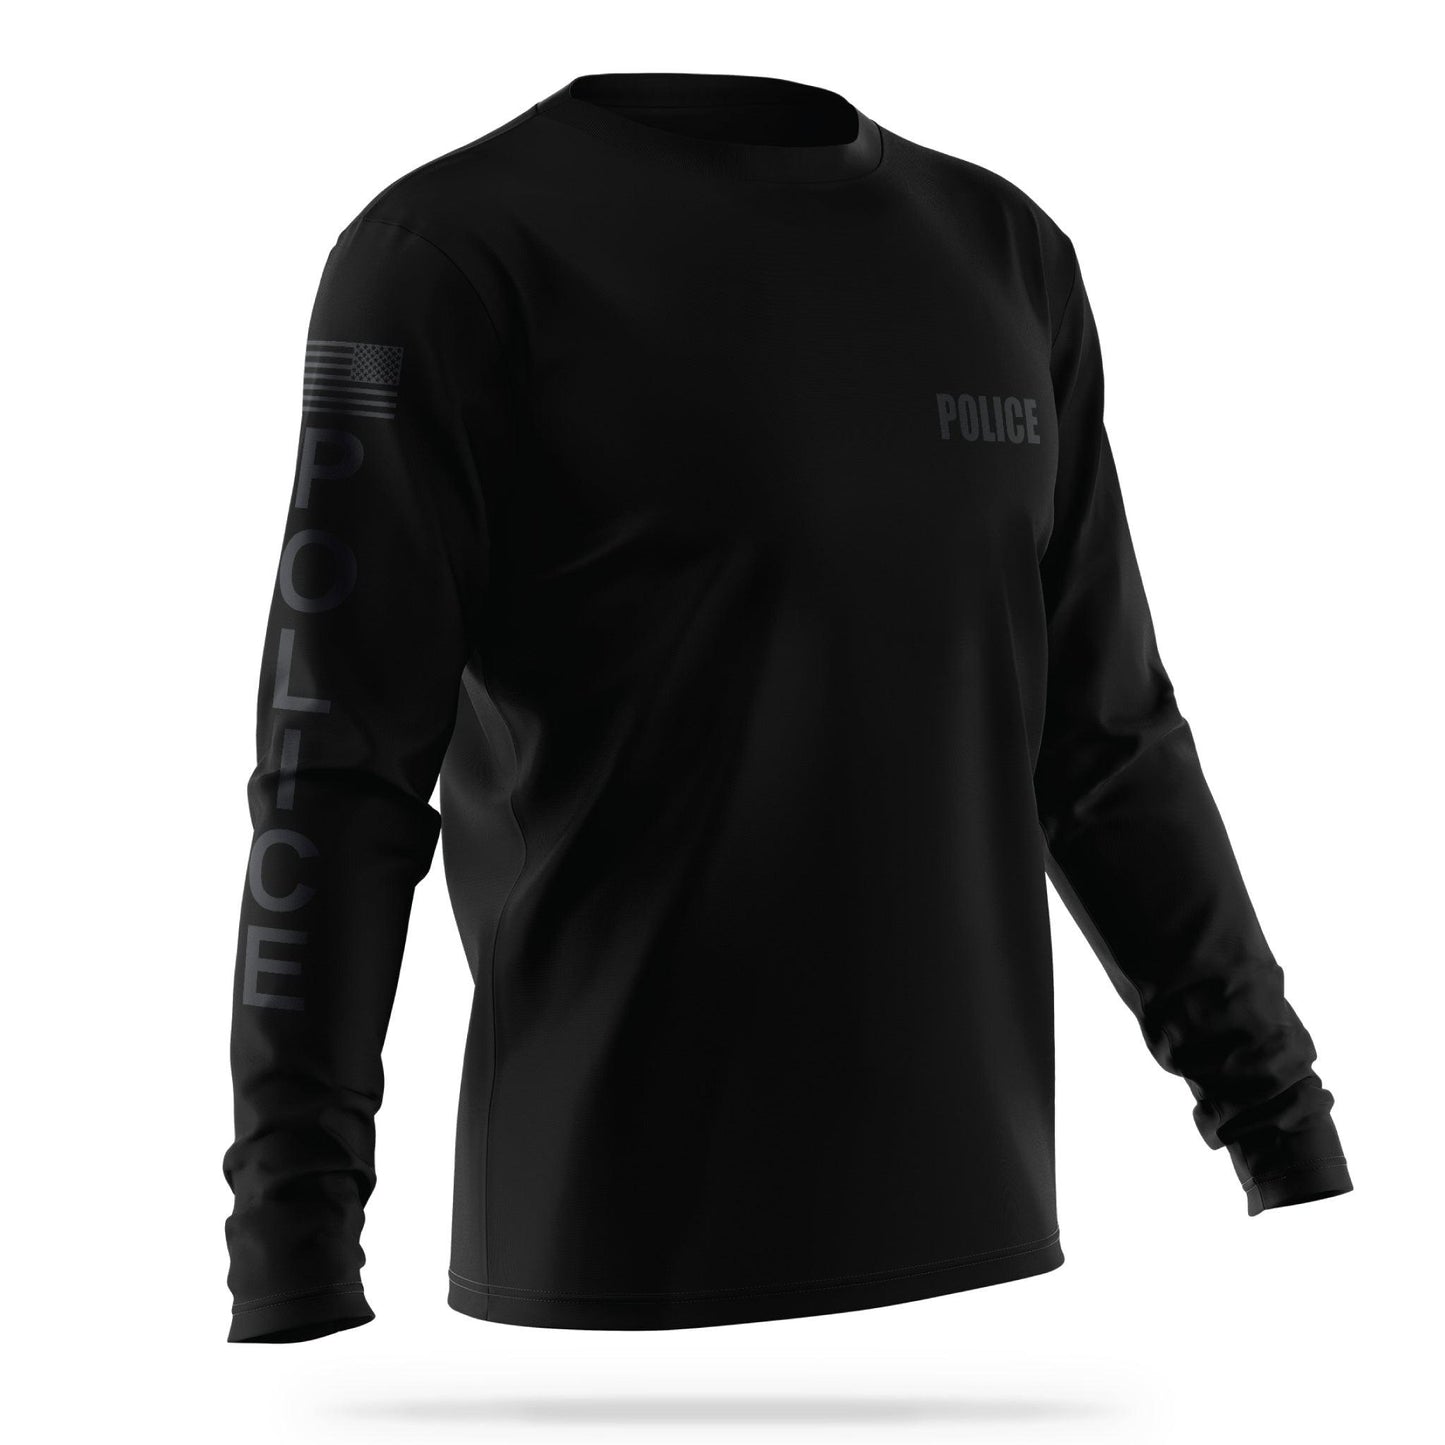 [POLICE] Men's Utility Long Sleeve [BLK/BLK]-13 Fifty Apparel